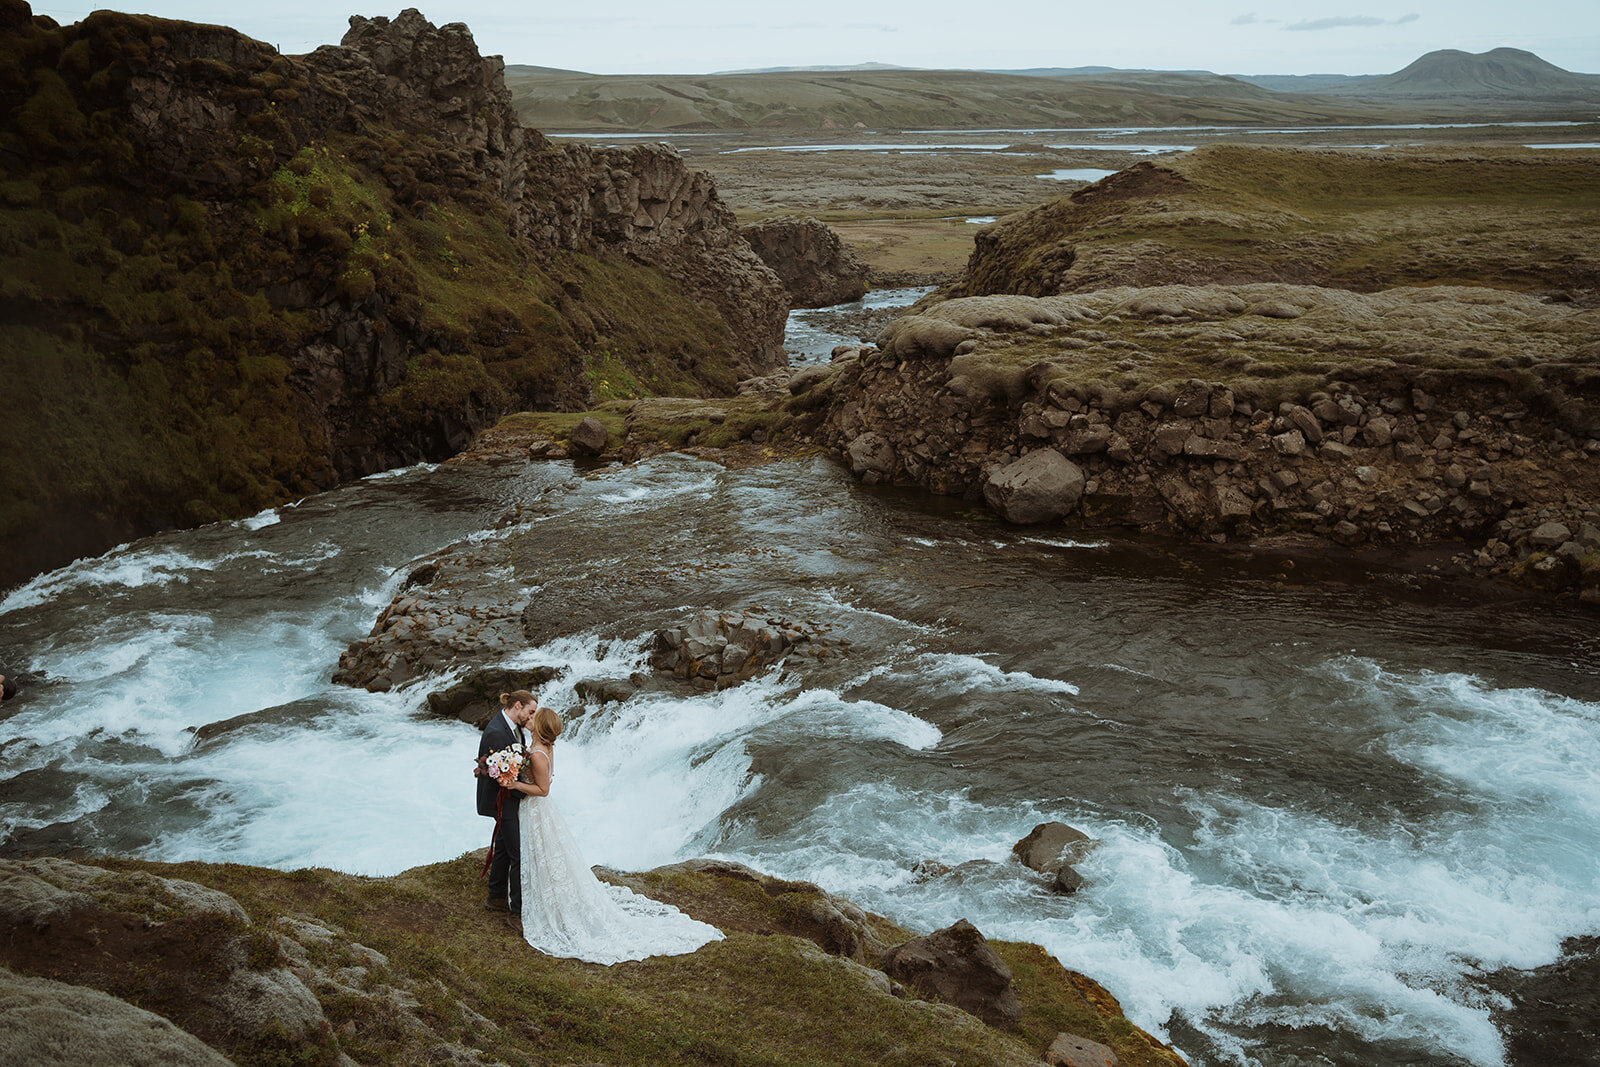 If you're planning to elope in Iceland, come and get inspired by Jess & Rob's stunning adventure elopement in the highlands! Discover mountain elopement ideas, non traditional wedding locations, elopement wedding looks and fun wedding ideas. Book Sydney for your adventurous mountain elopement or destination elopement